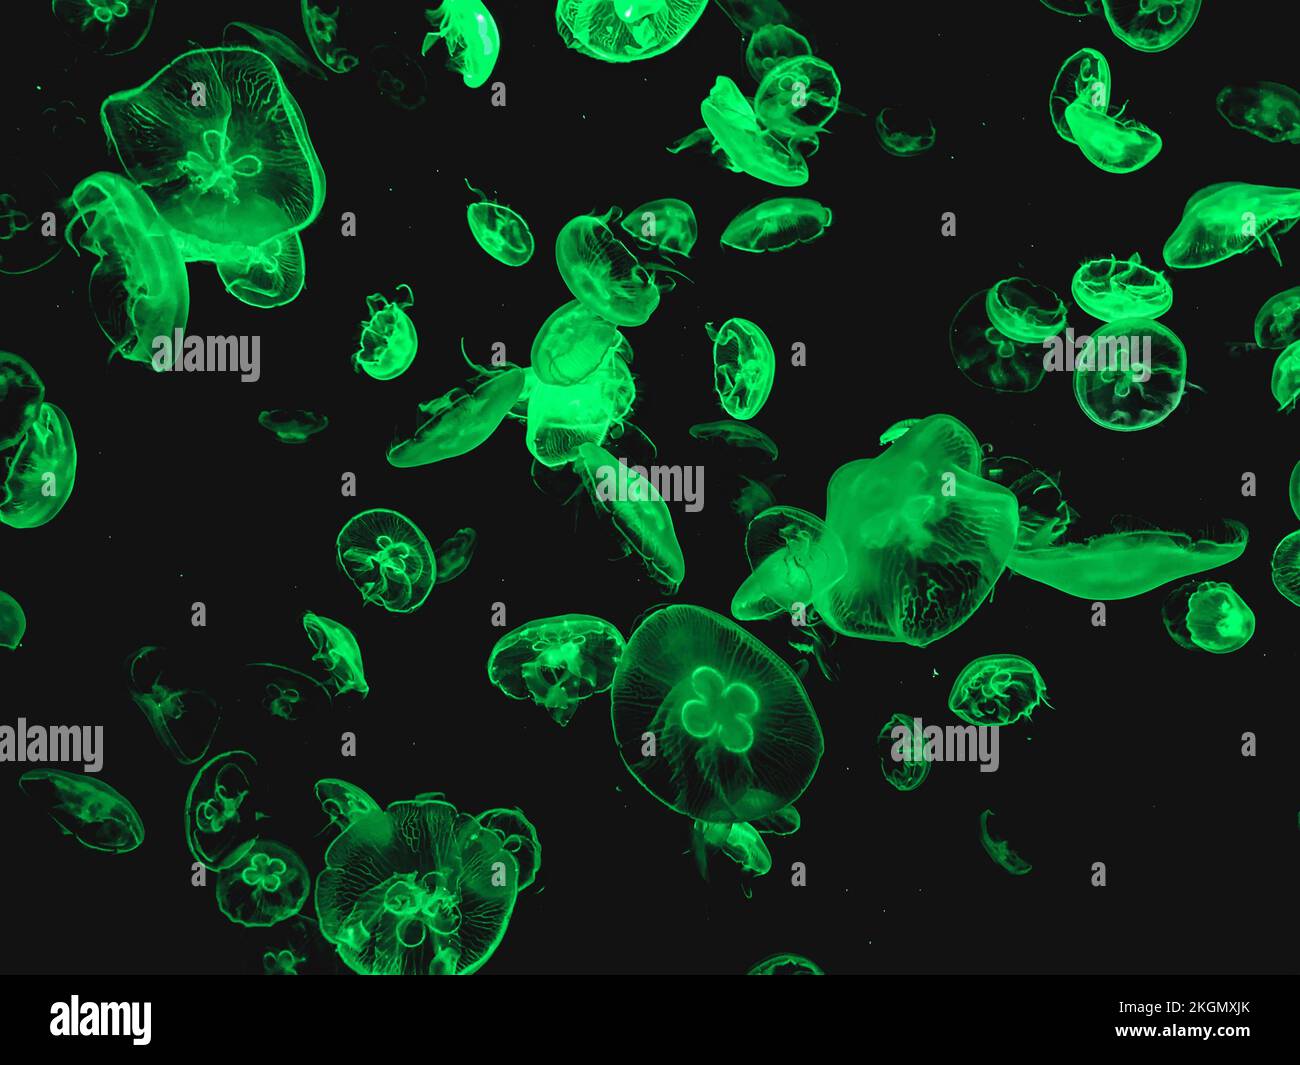 A large group of jellyfish in green color, aesthetic background or wallpaper Stock Photo